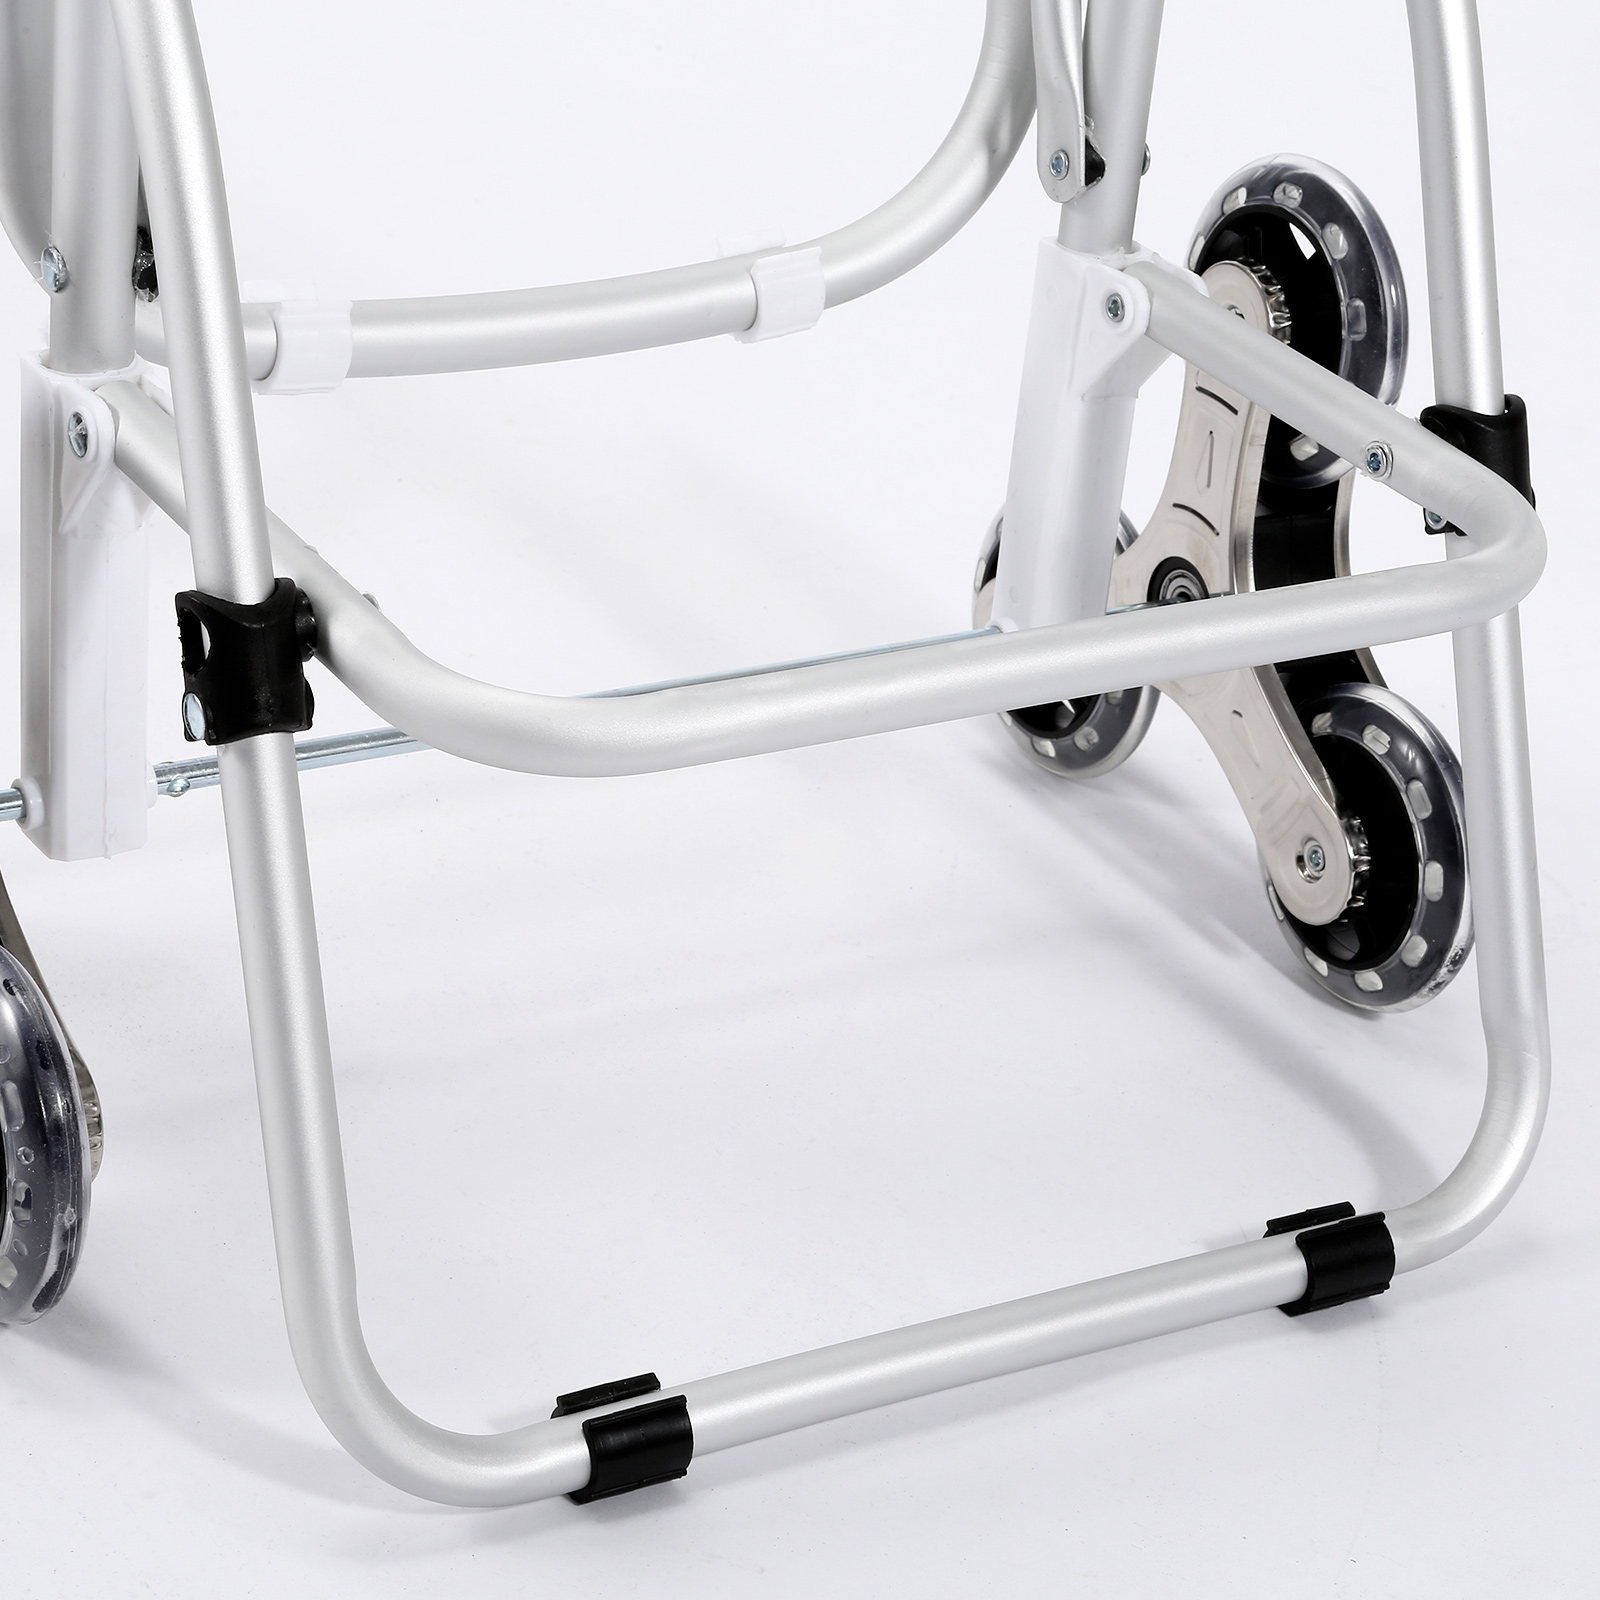 Foldable Stair Climber Trolley